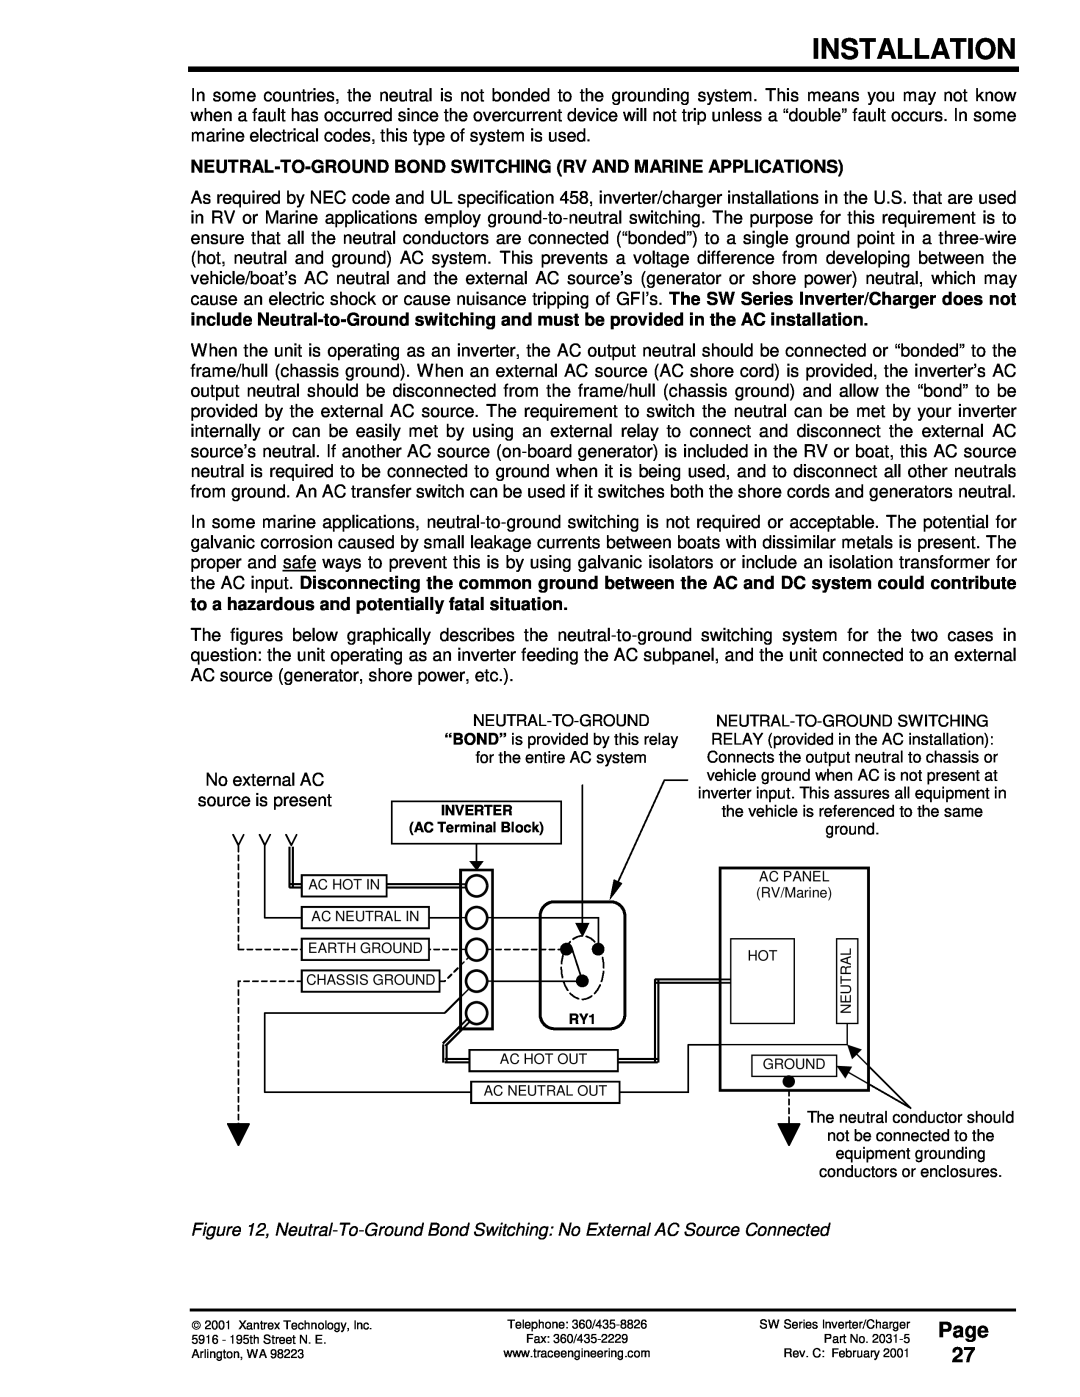 Xantrex Technology SW Series owner manual Page 27, Installation 